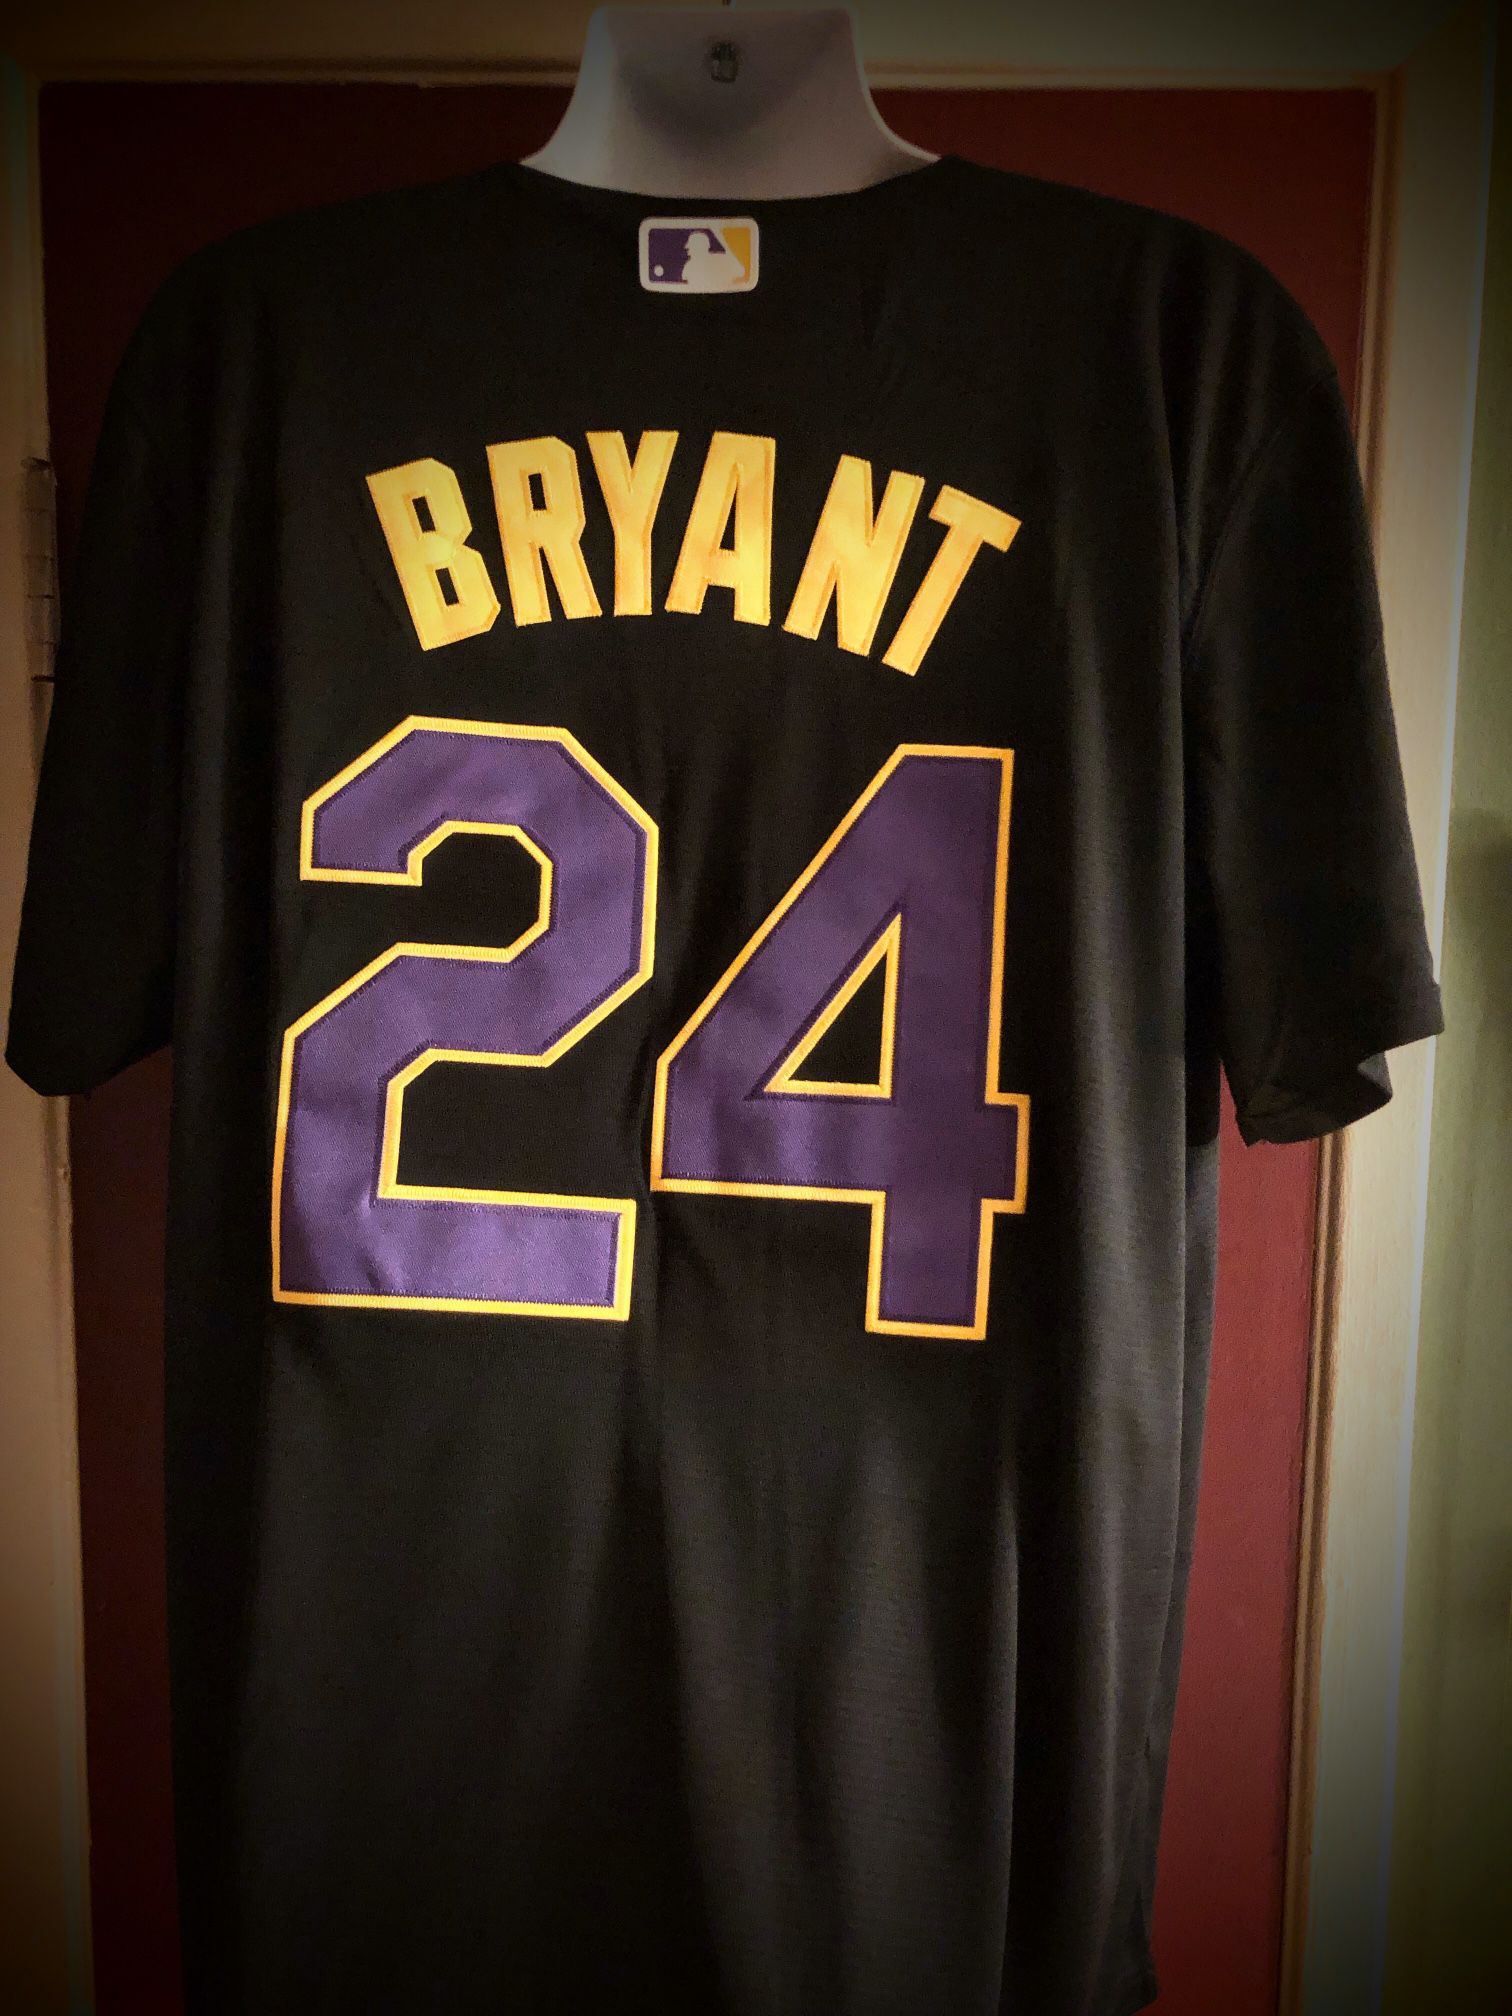 Los Angeles Dodgers #8/24 Kobe Bryant MLB Baseball Jersey for Sale in  Wilmington, CA - OfferUp